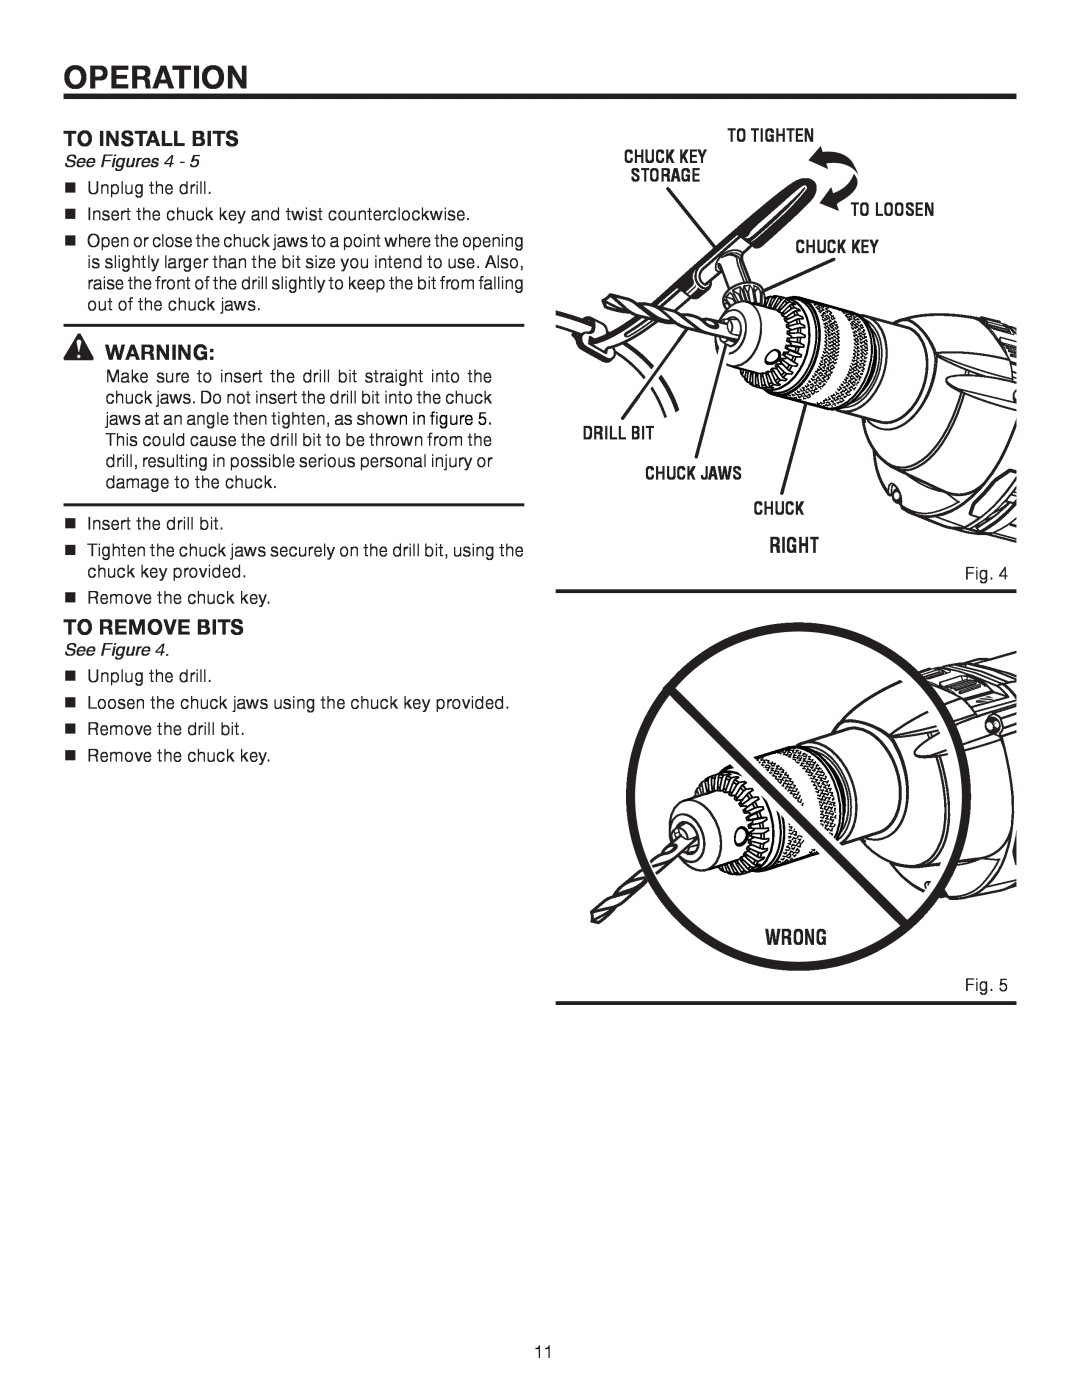 RIDGID R5013 manual Operation, To Install Bits, To Remove Bits, Right, Wrong, See Figures 